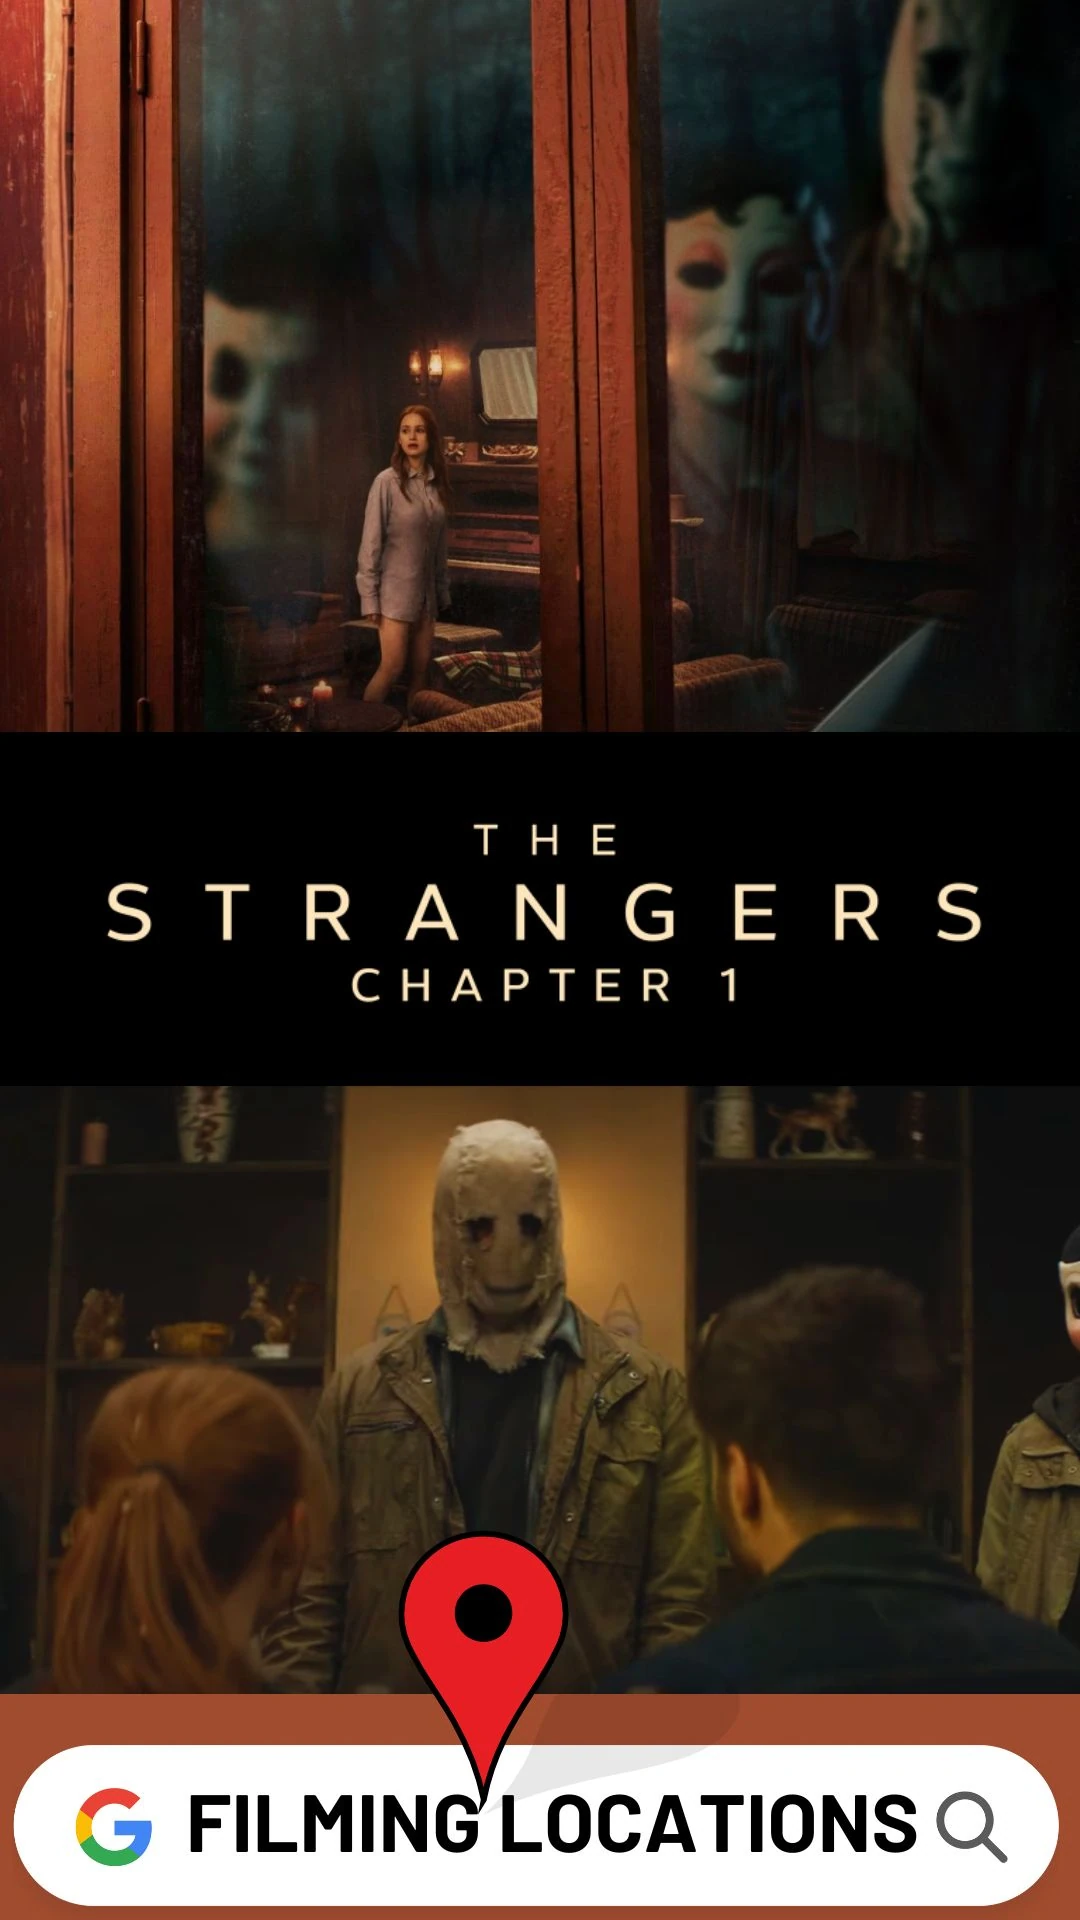 The Strangers Chapter 1 Filming Locations (1)